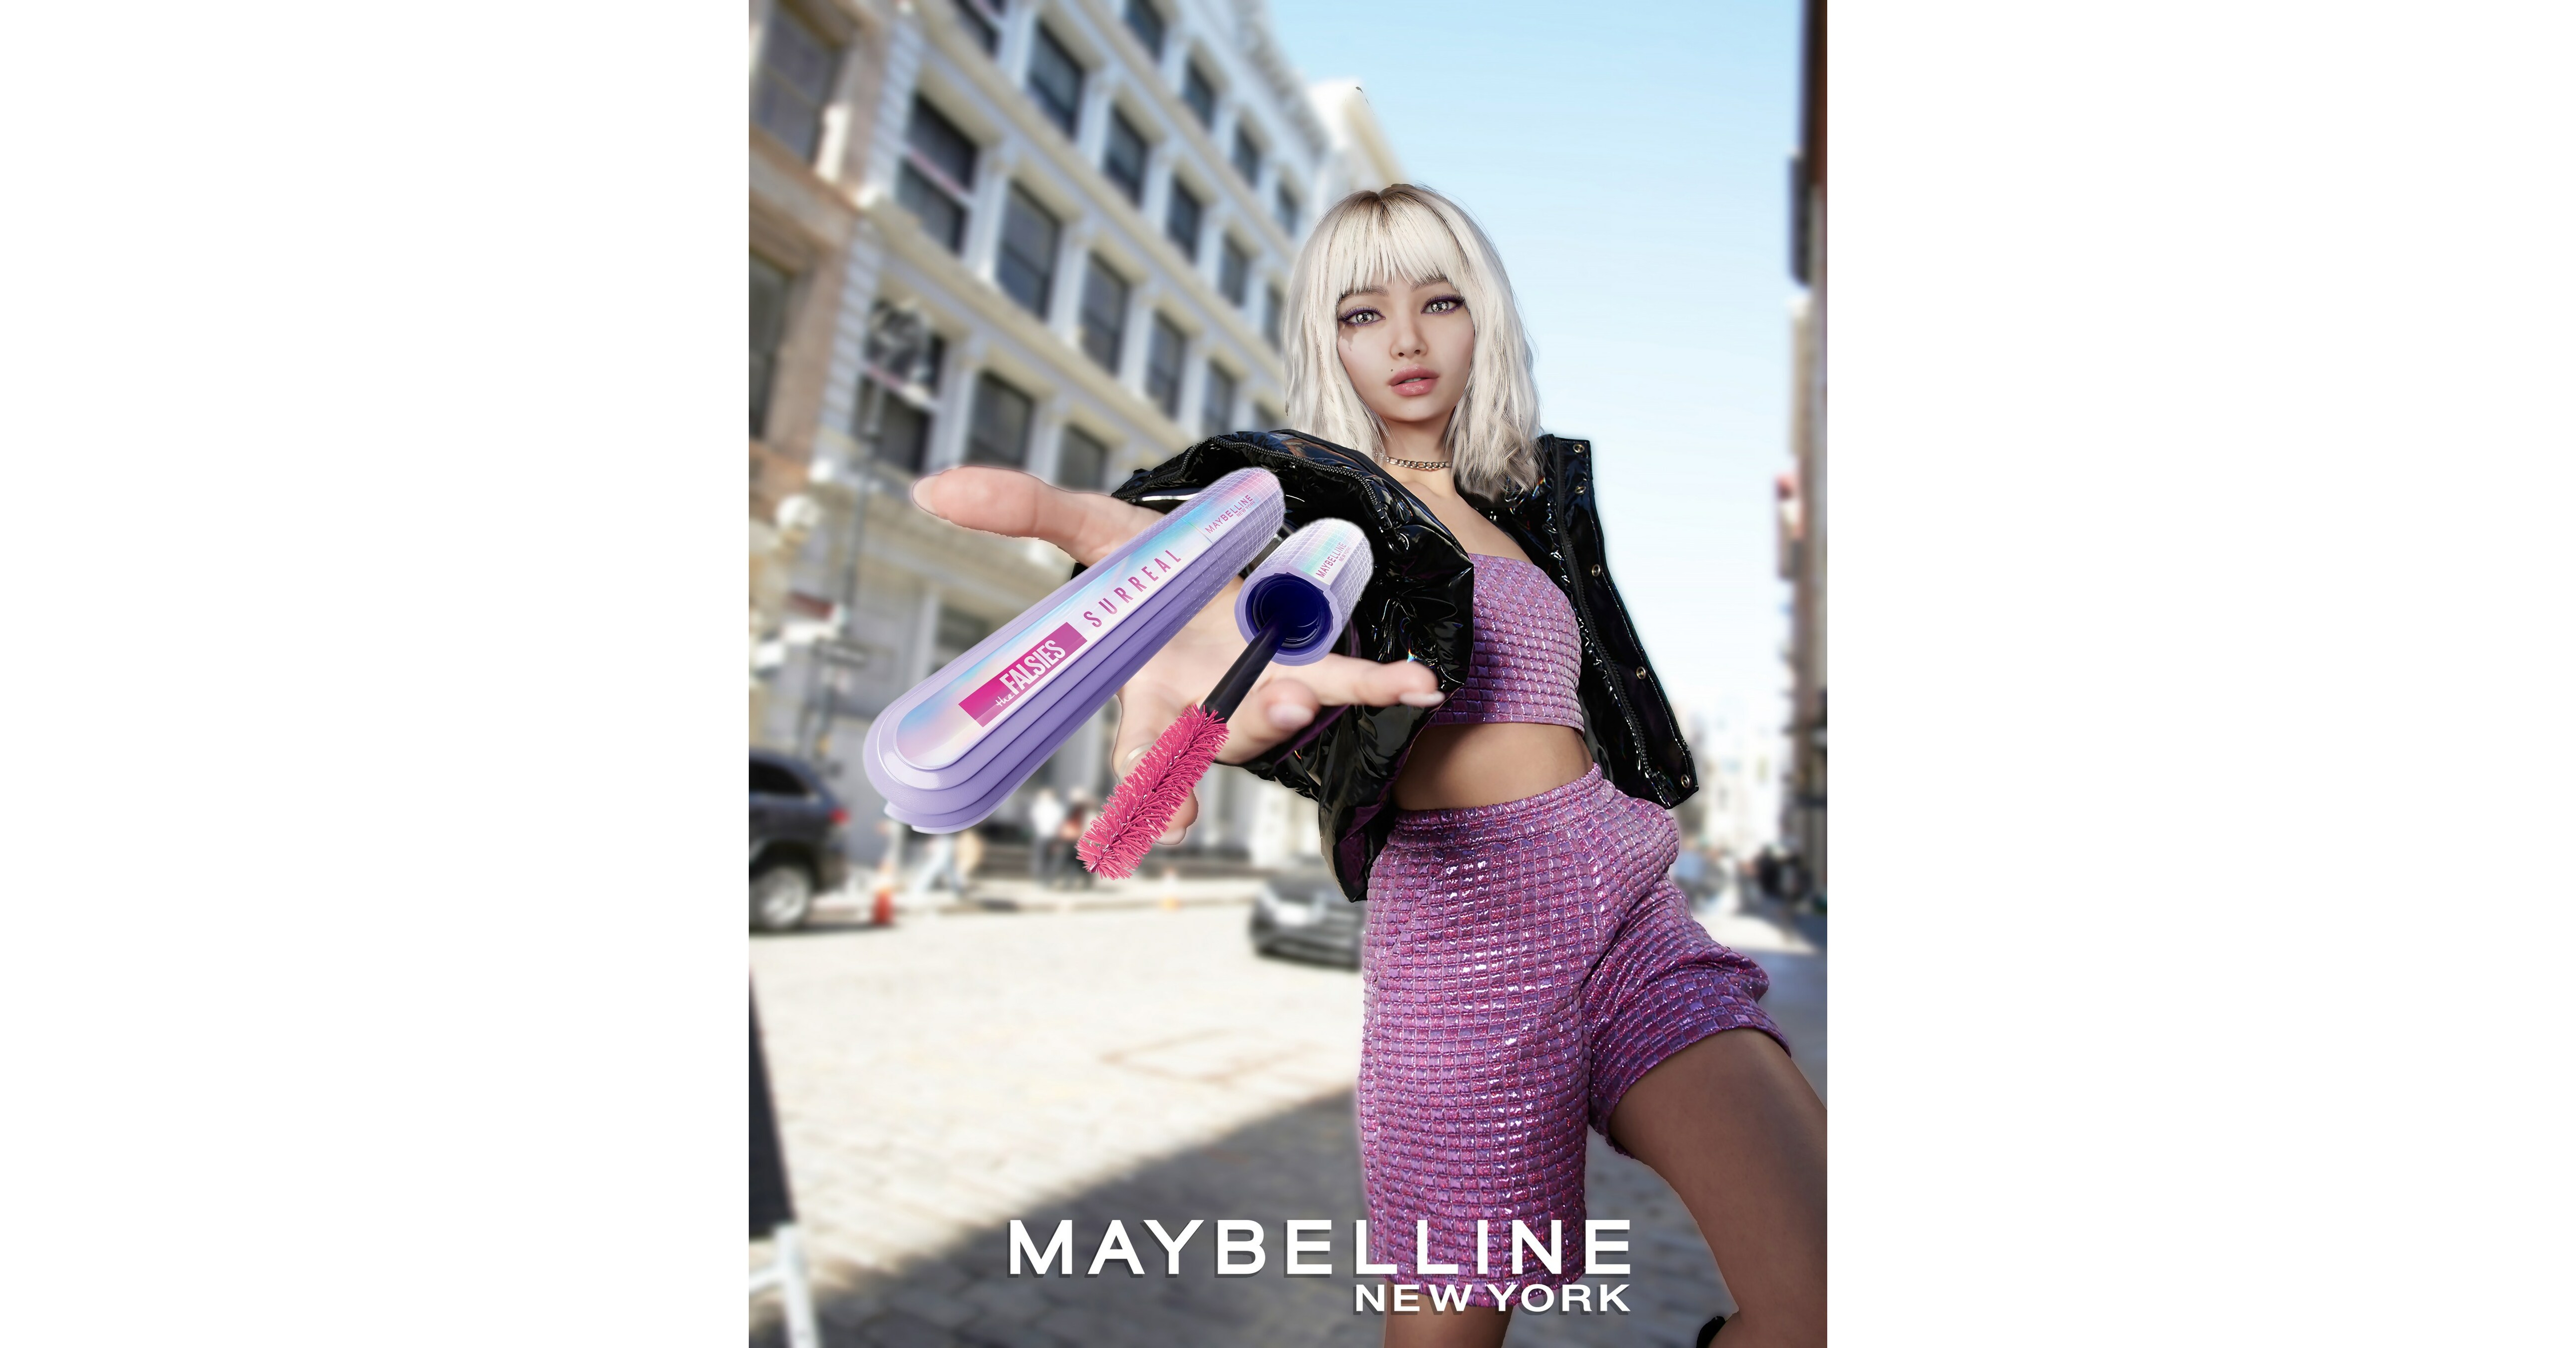 MAYBELLINE NEW YORK LAUNCHES THE FIRST-EVER EXTENSIONS ITS FALSIES SURREAL MASCARA AVATAR FEATURING